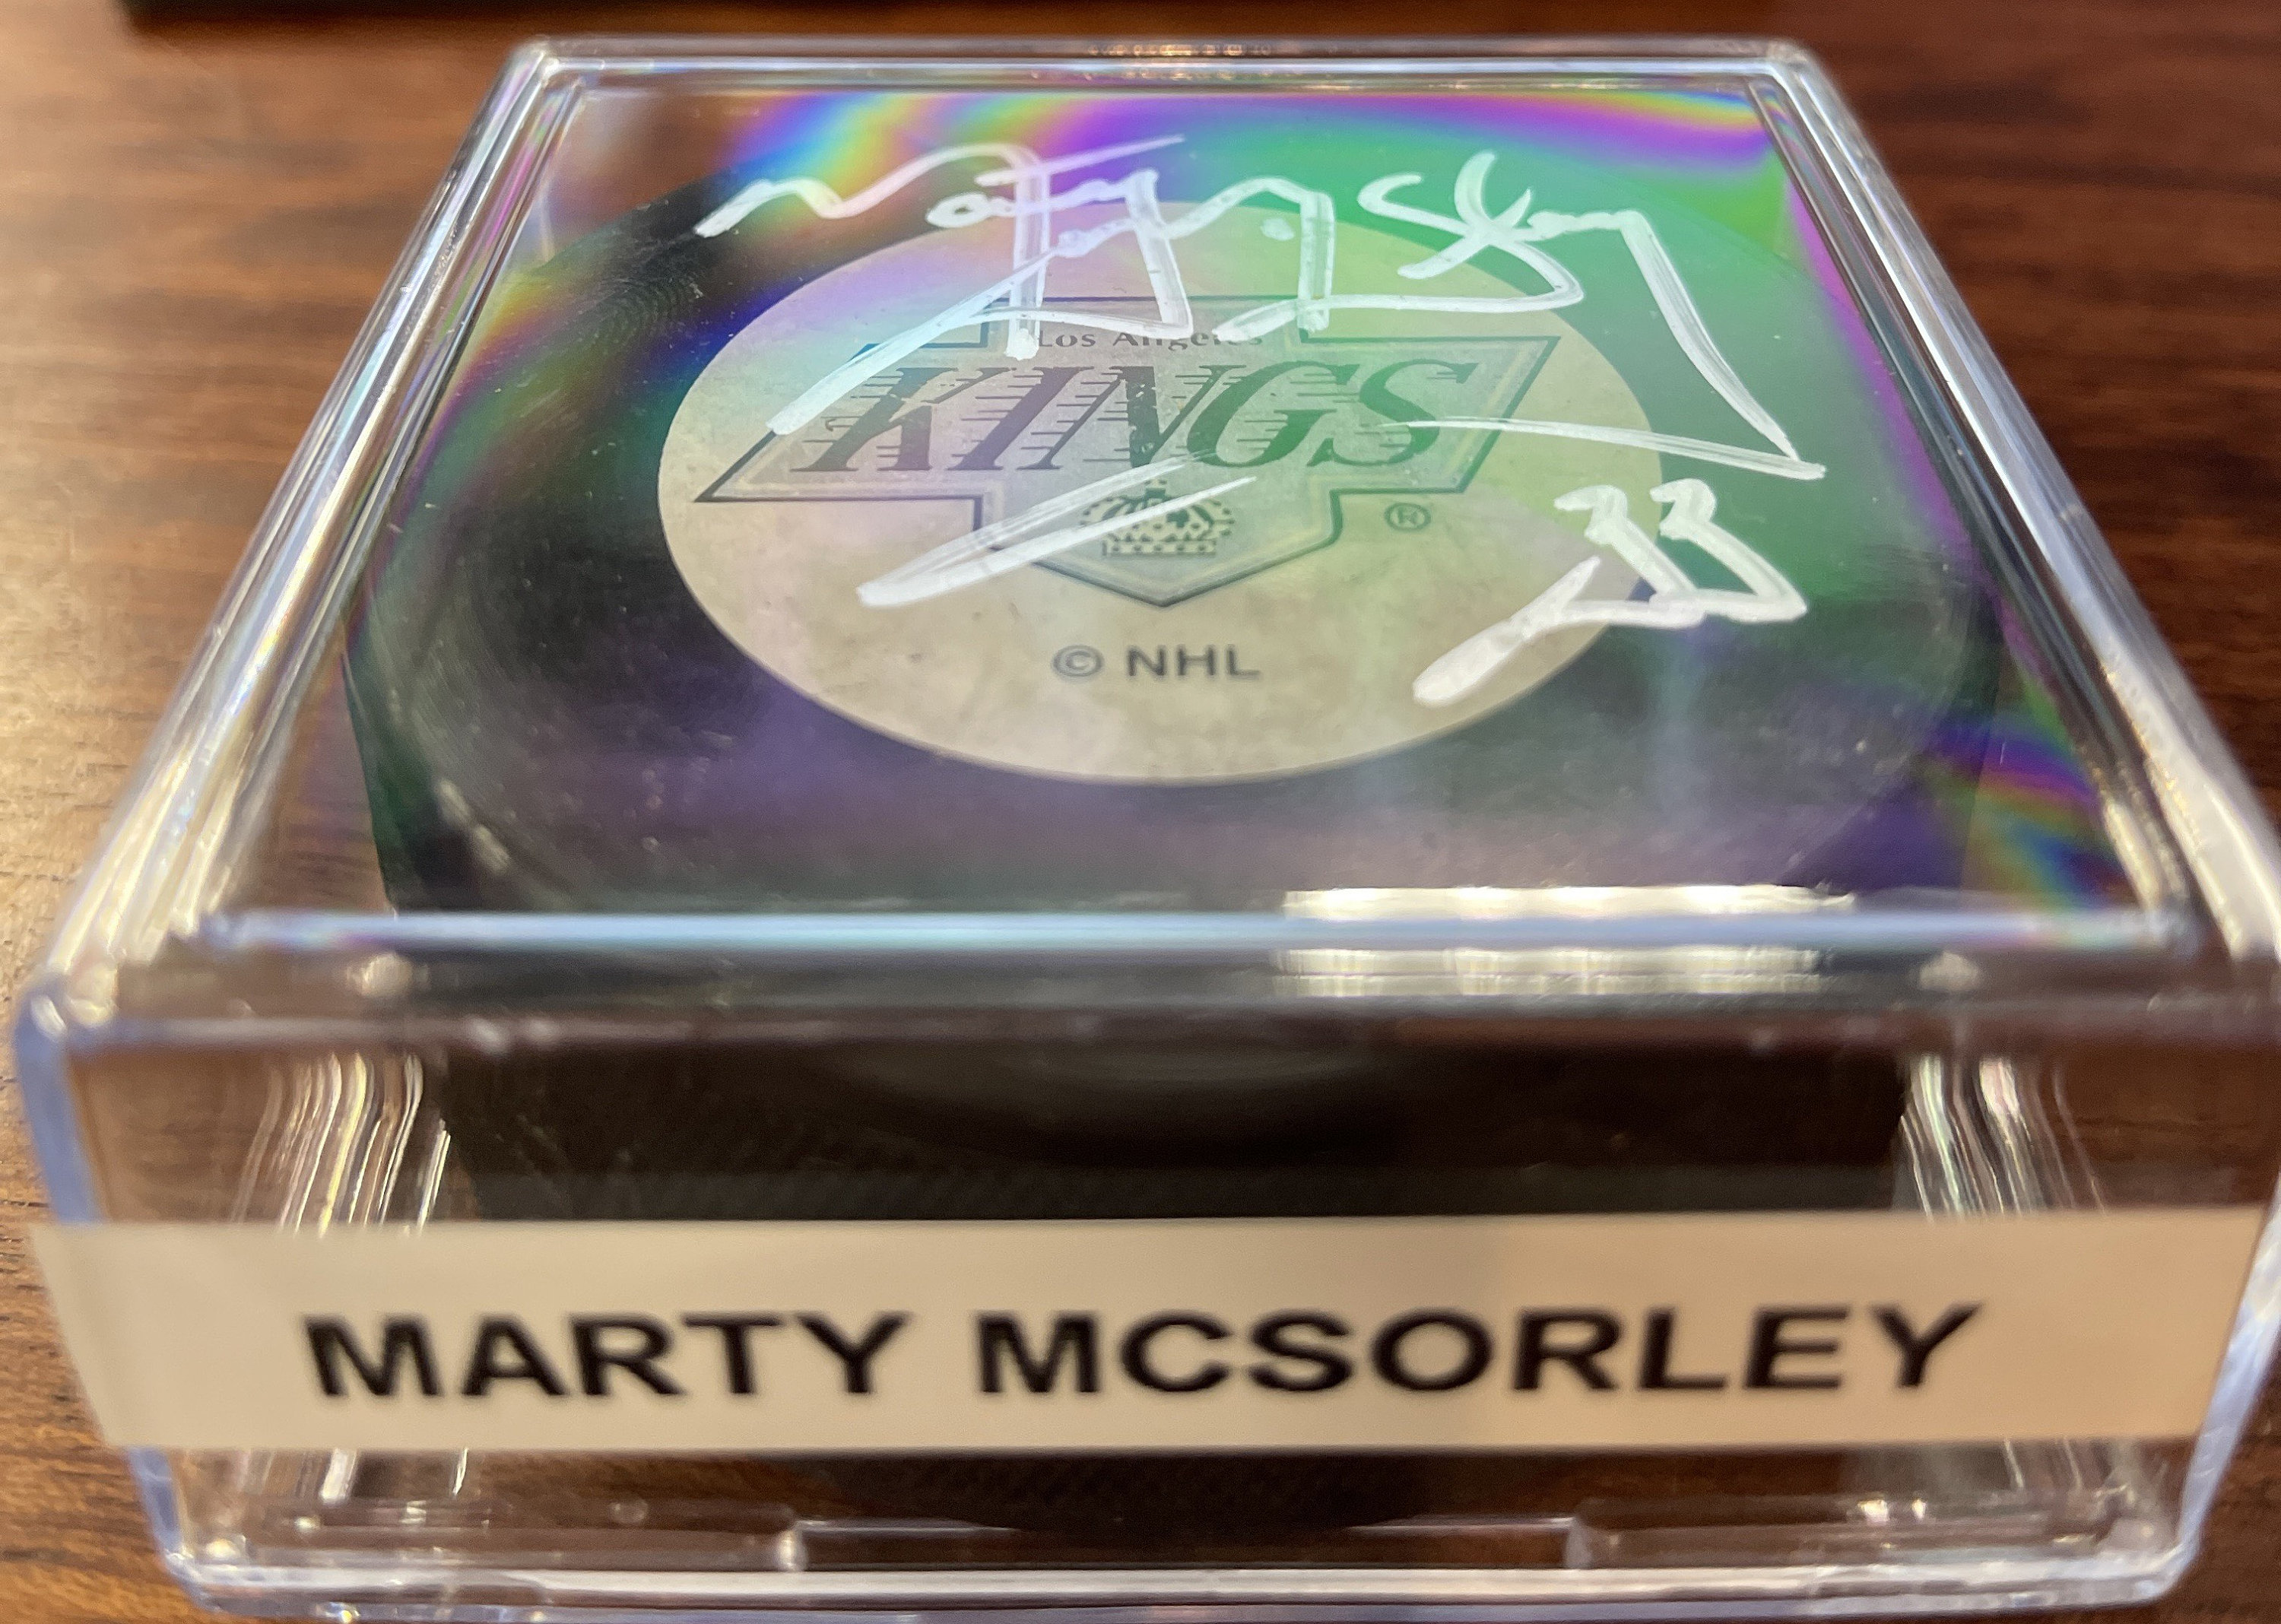 Marty McSorley Autographed Memorabilia  Signed Photo, Jersey, Collectibles  & Merchandise